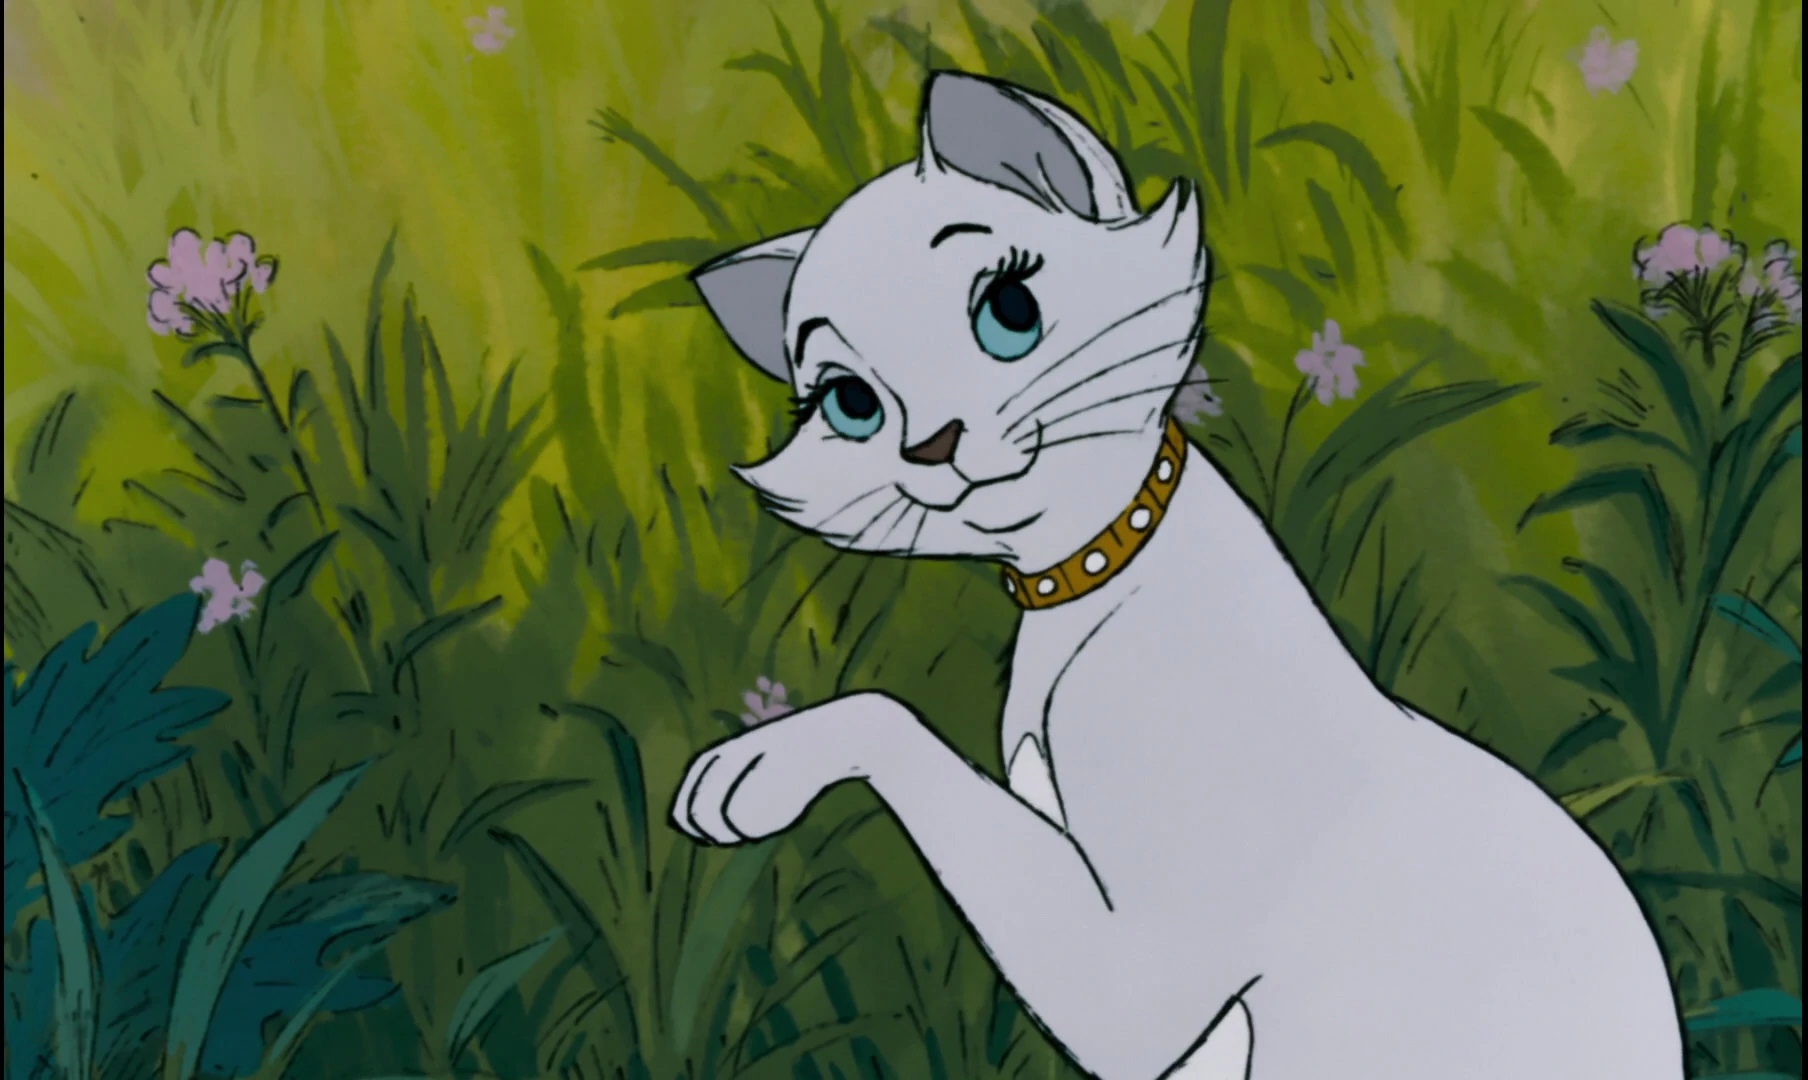 Duchess from The Aristocats